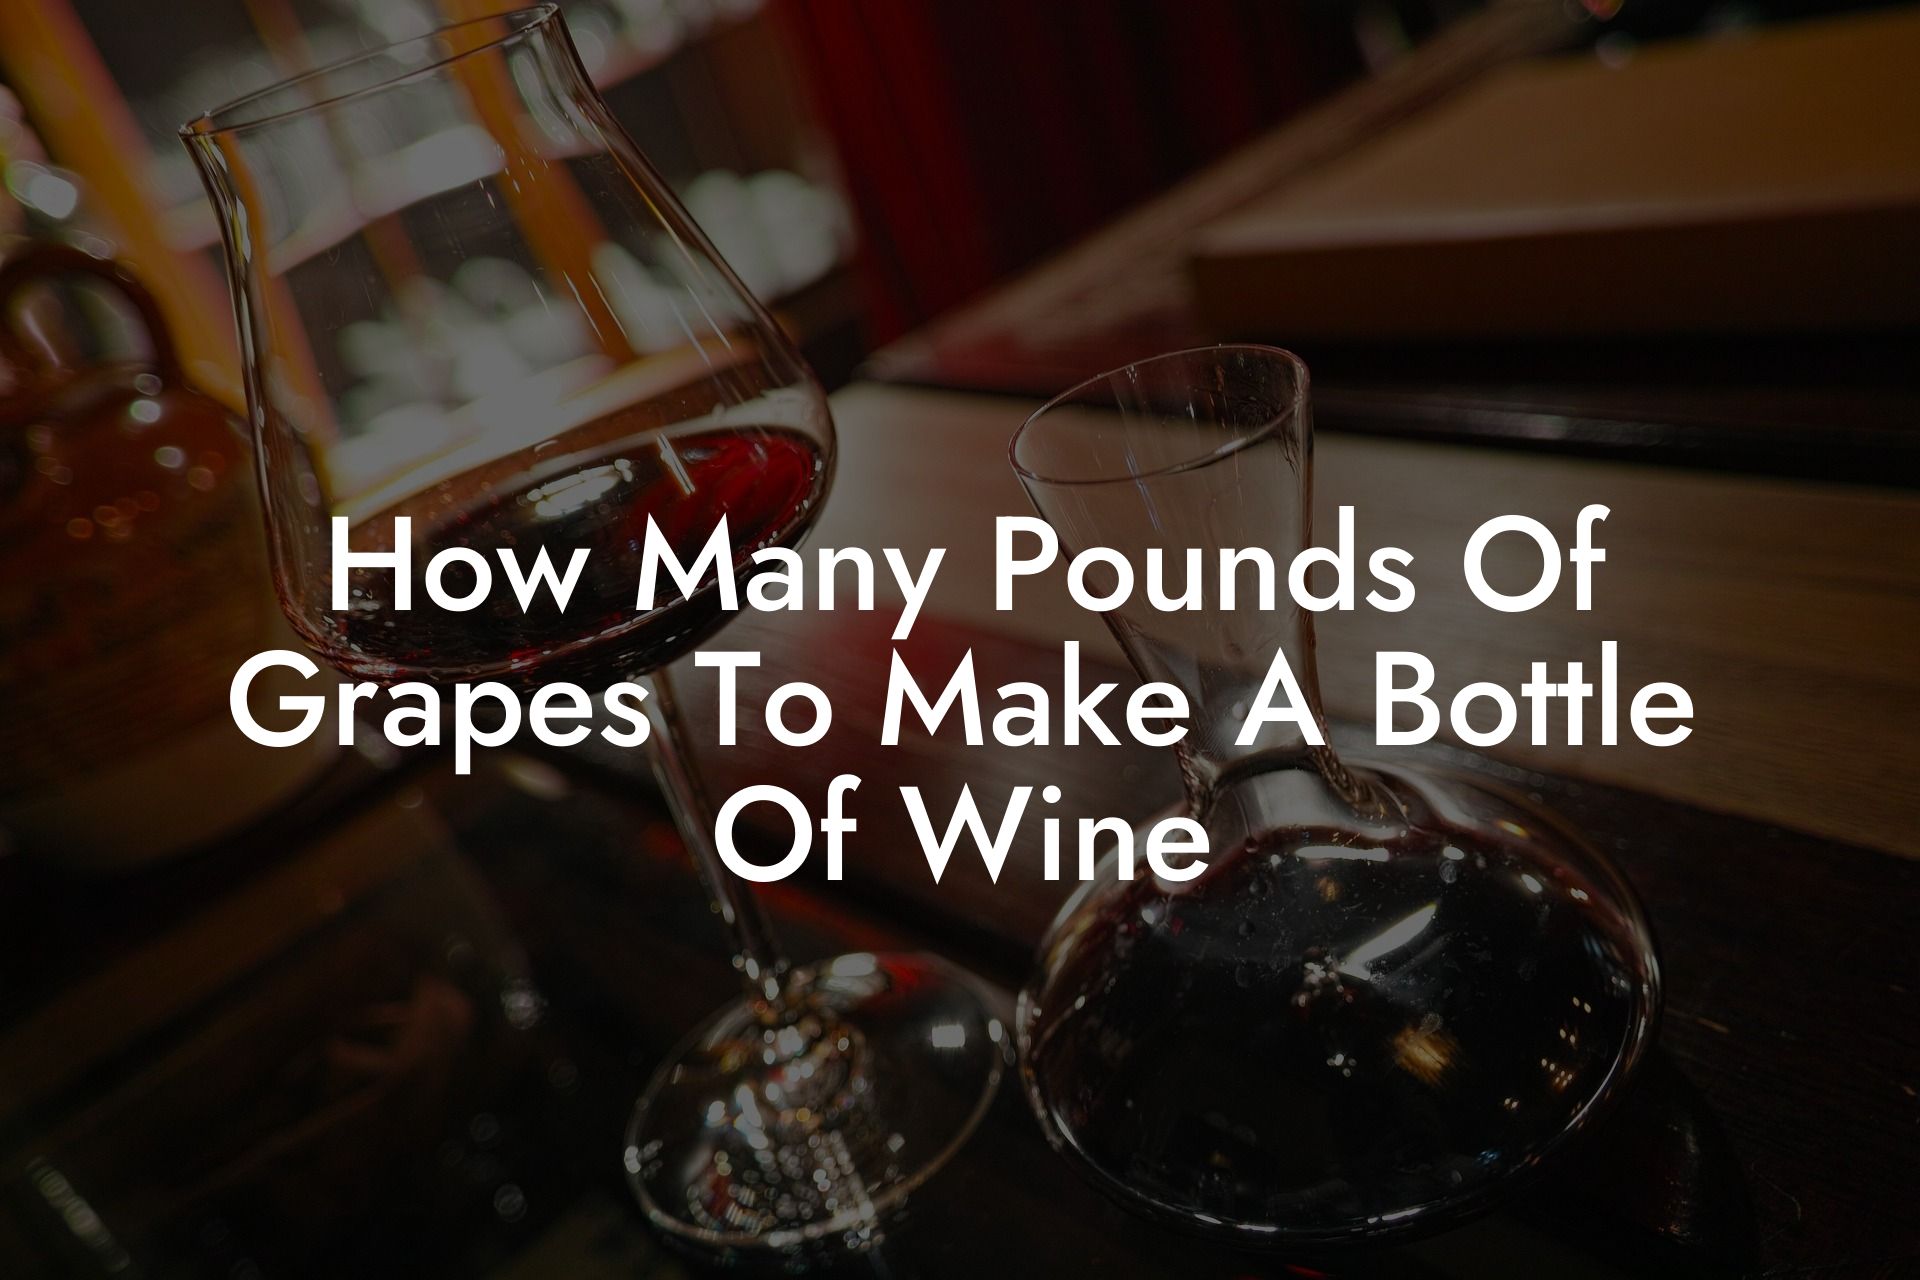 How Many Pounds Of Grapes To Make A Bottle Of Wine